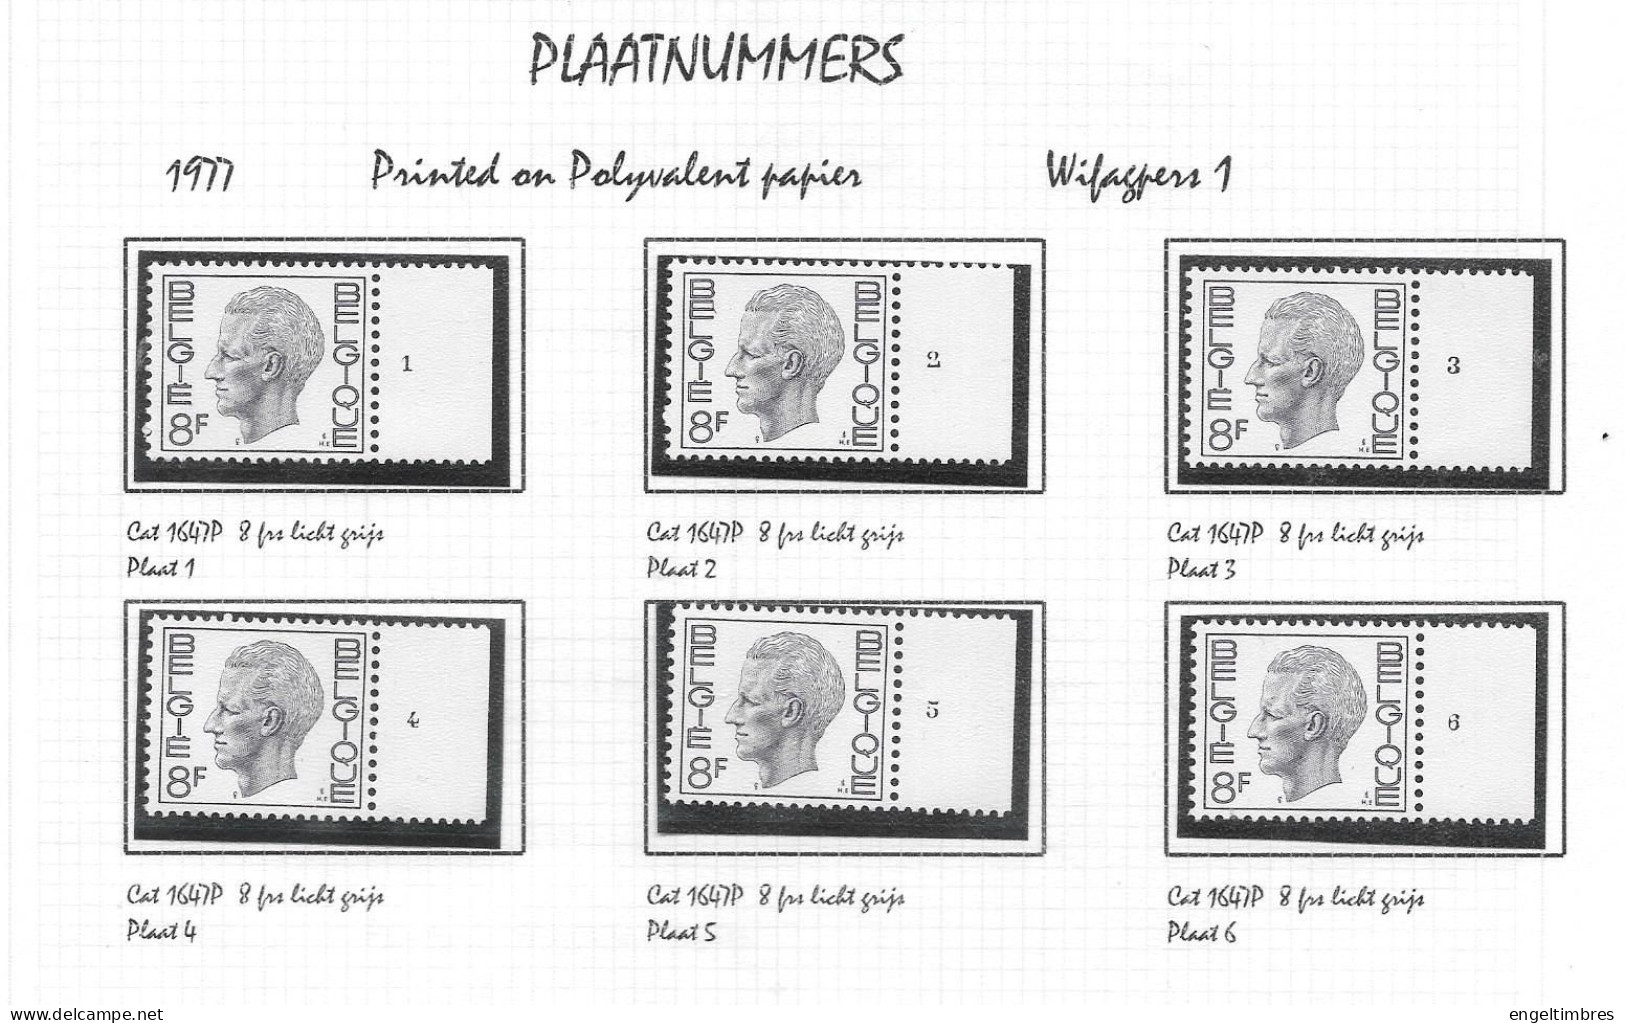 Belgium - Large selection of ELSTROM stamps - all POSTFRIS - and all with Plaatnummer